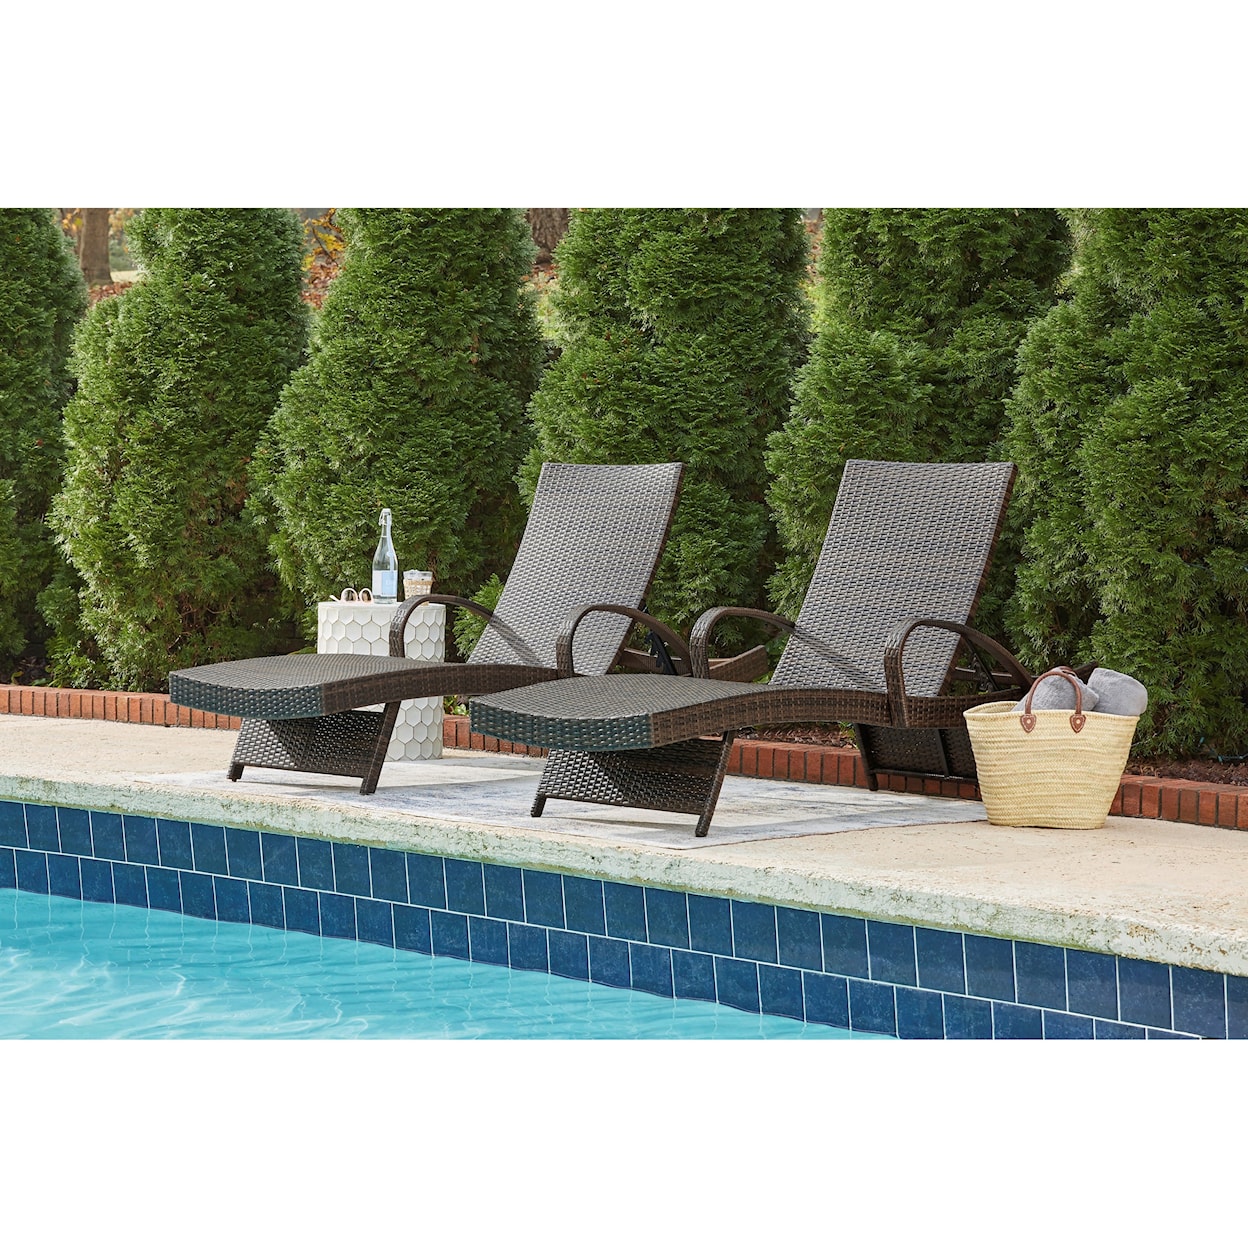 Benchcraft Kantana Set of 2 Chaise Lounges